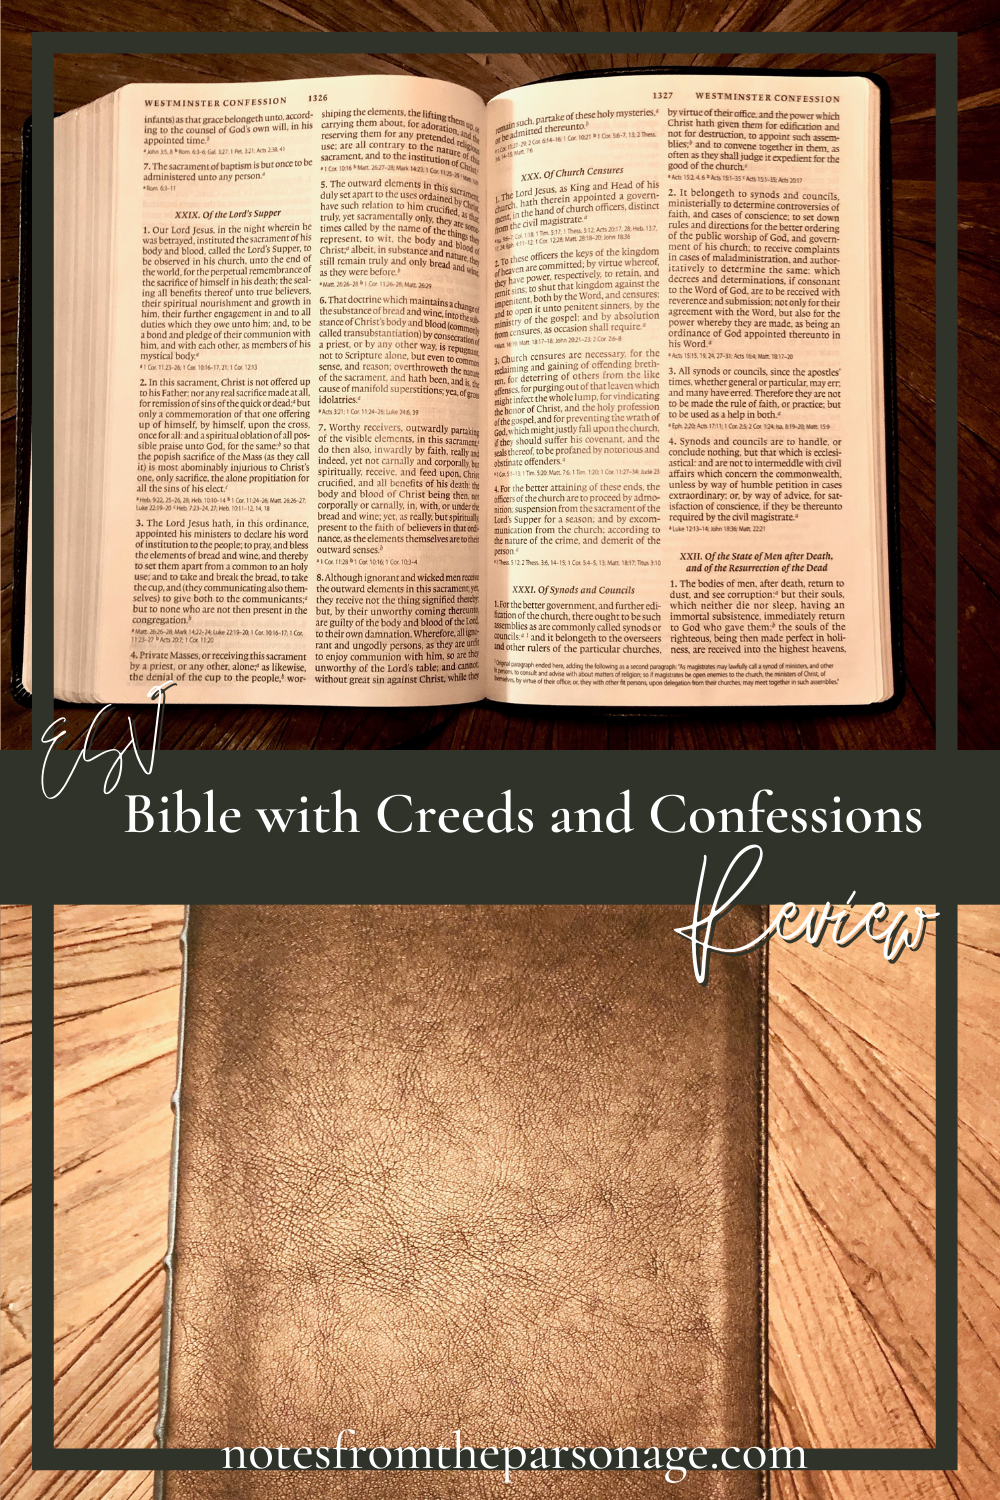 Two images of the ESV Bible with Creeds and Confessions on a Pinable image.